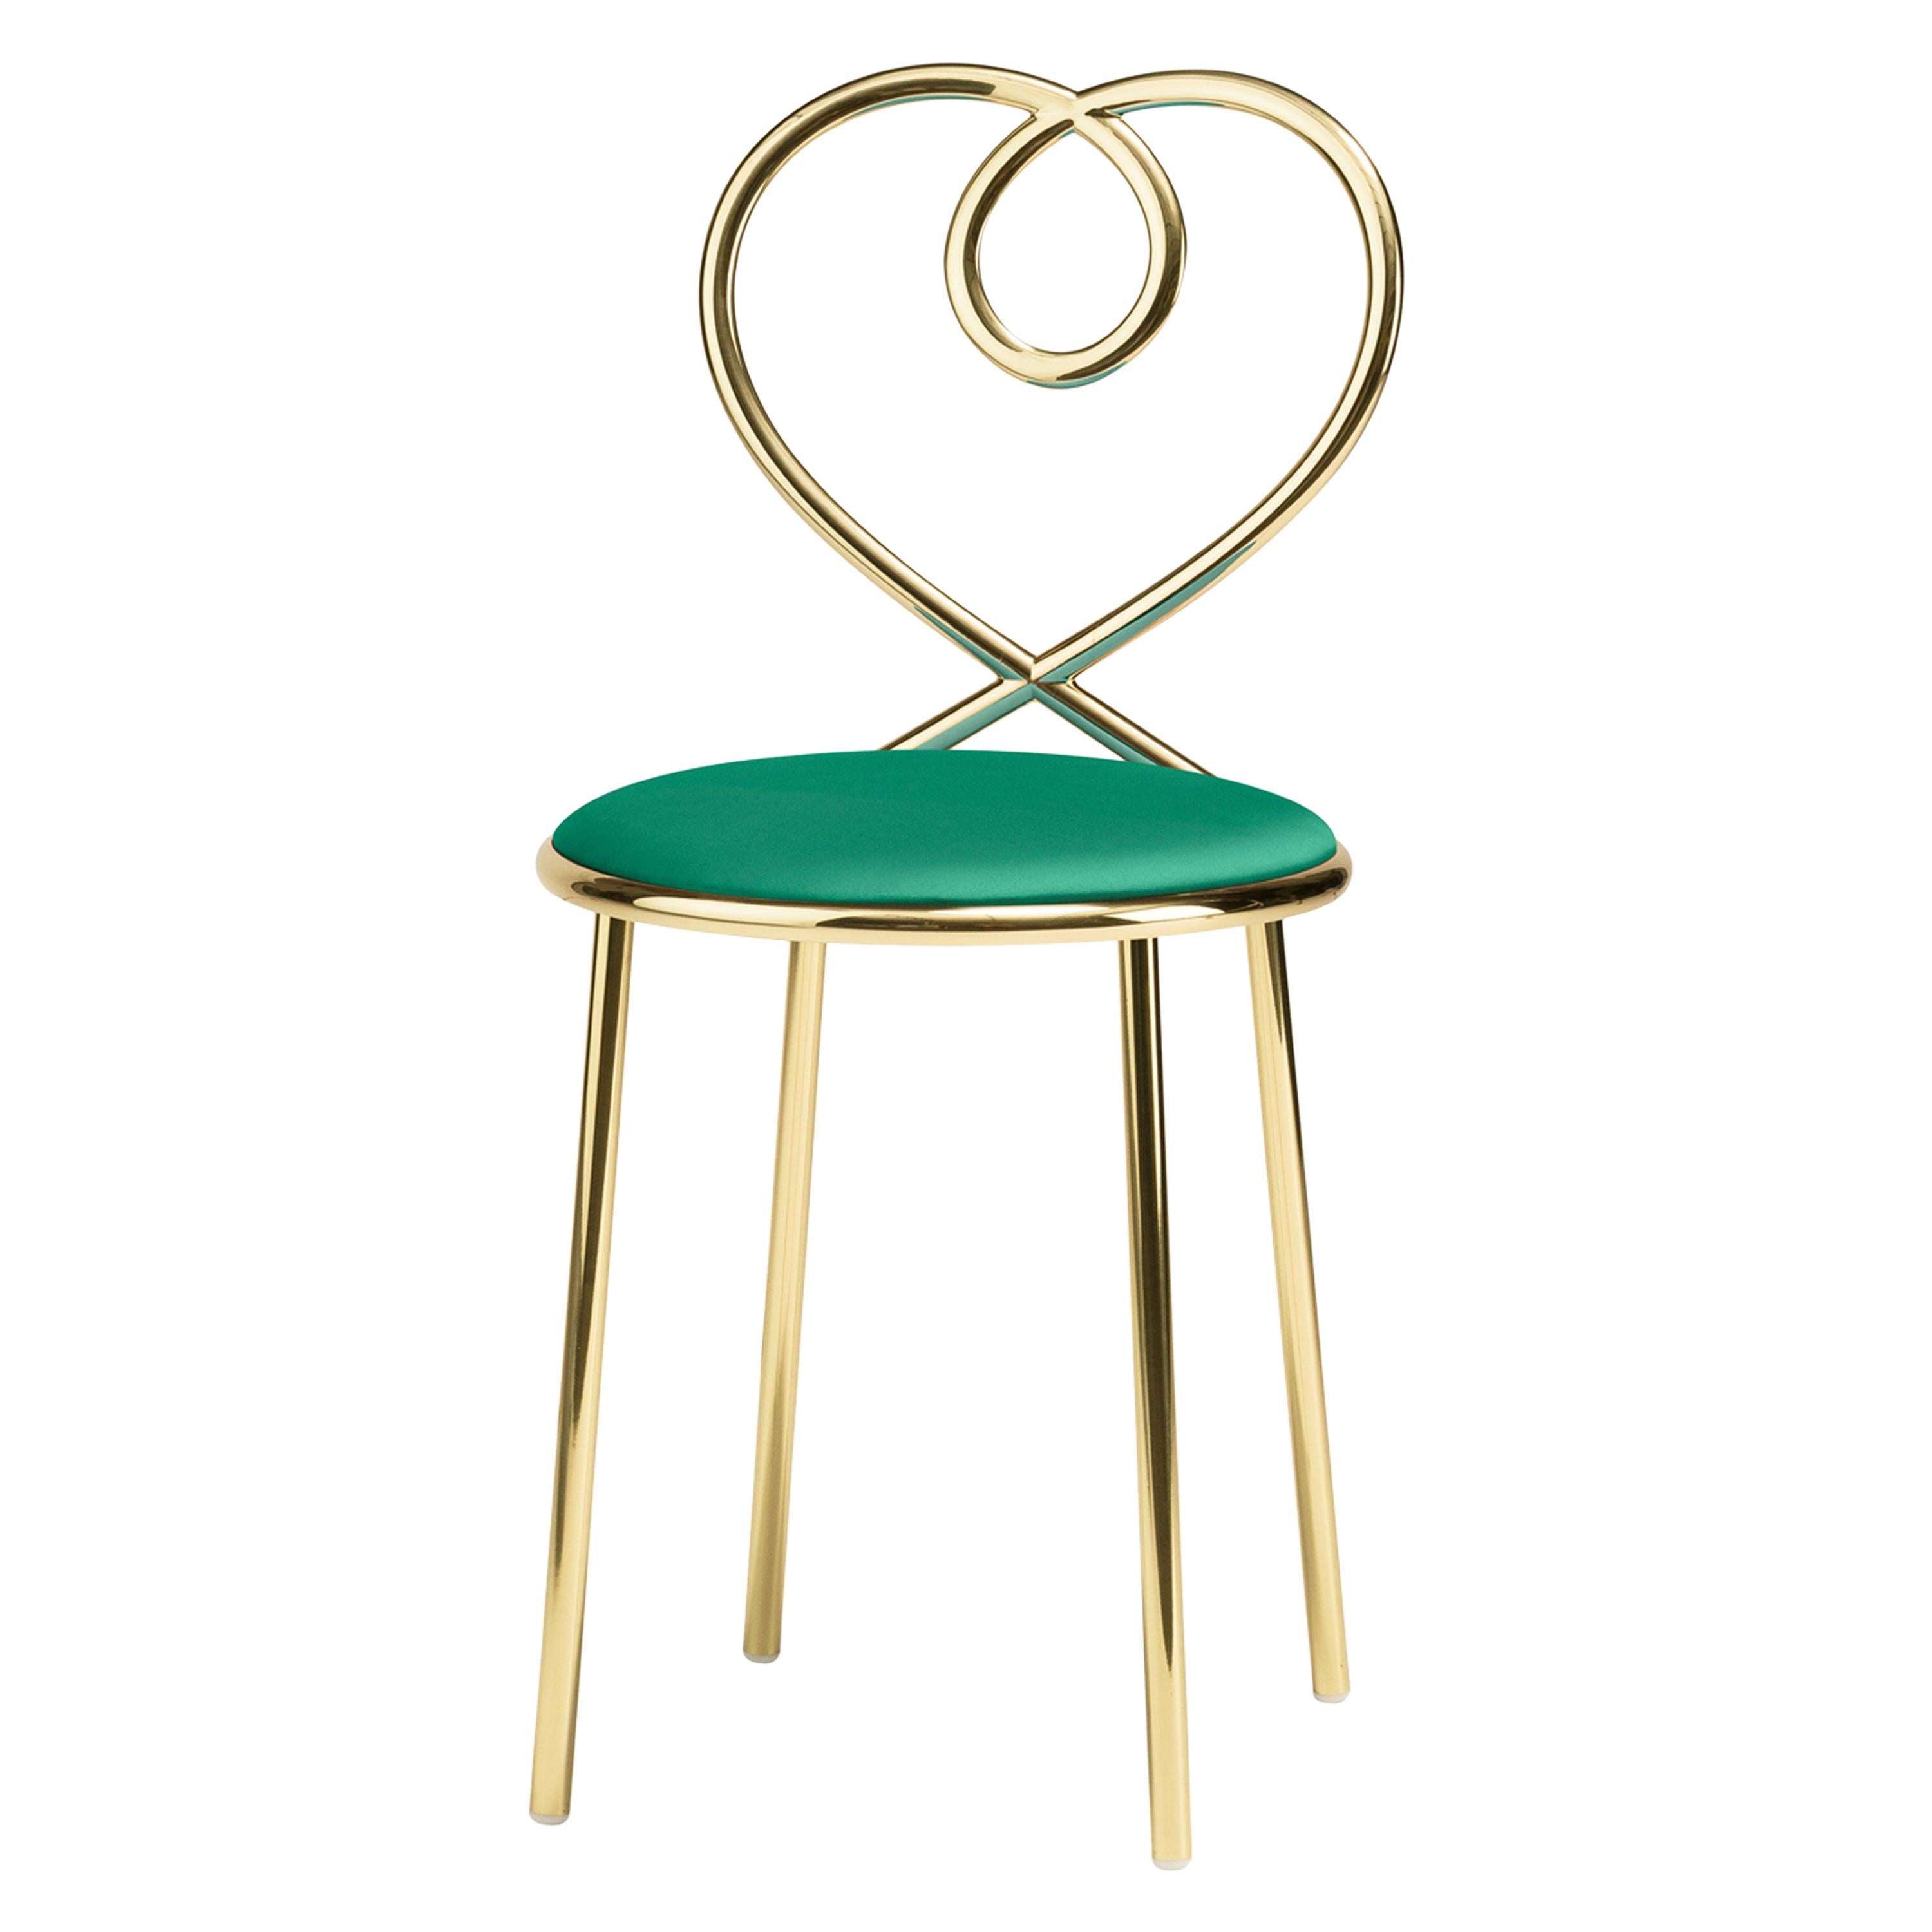 Love Chair in Malachite with Polished Brass by Nika Zupanc